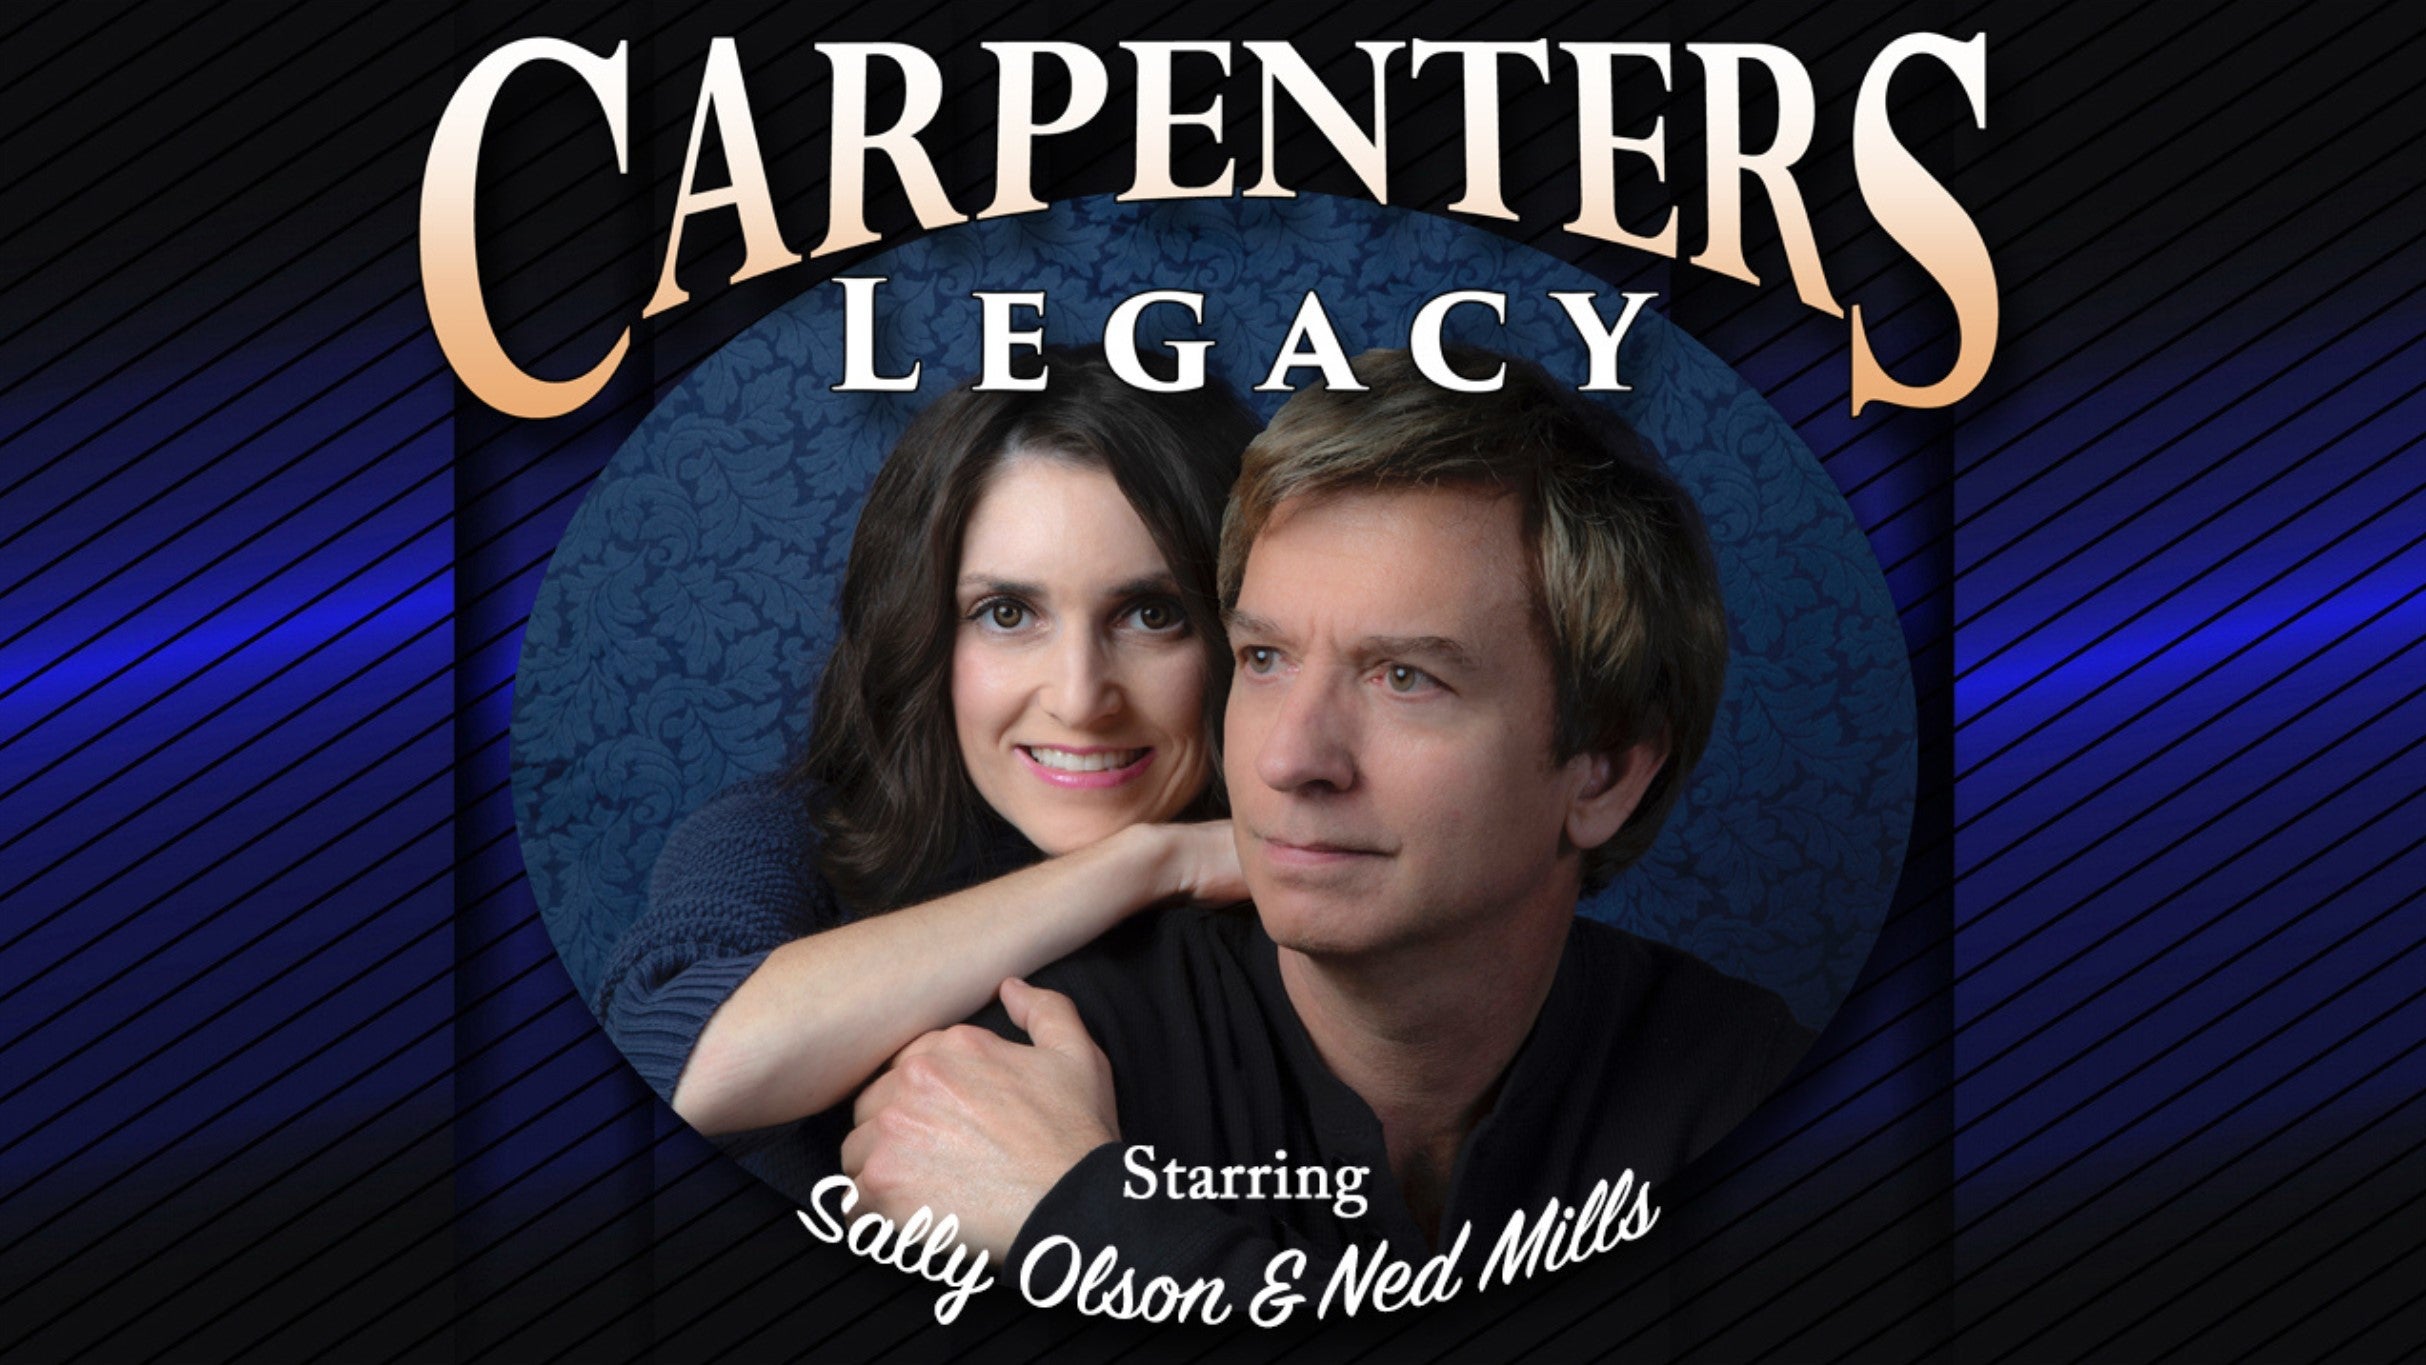 Carpenters Legacy at V Theater at Planet Hollywood Inside the Miracle Mile Mall – Las Vegas, NV